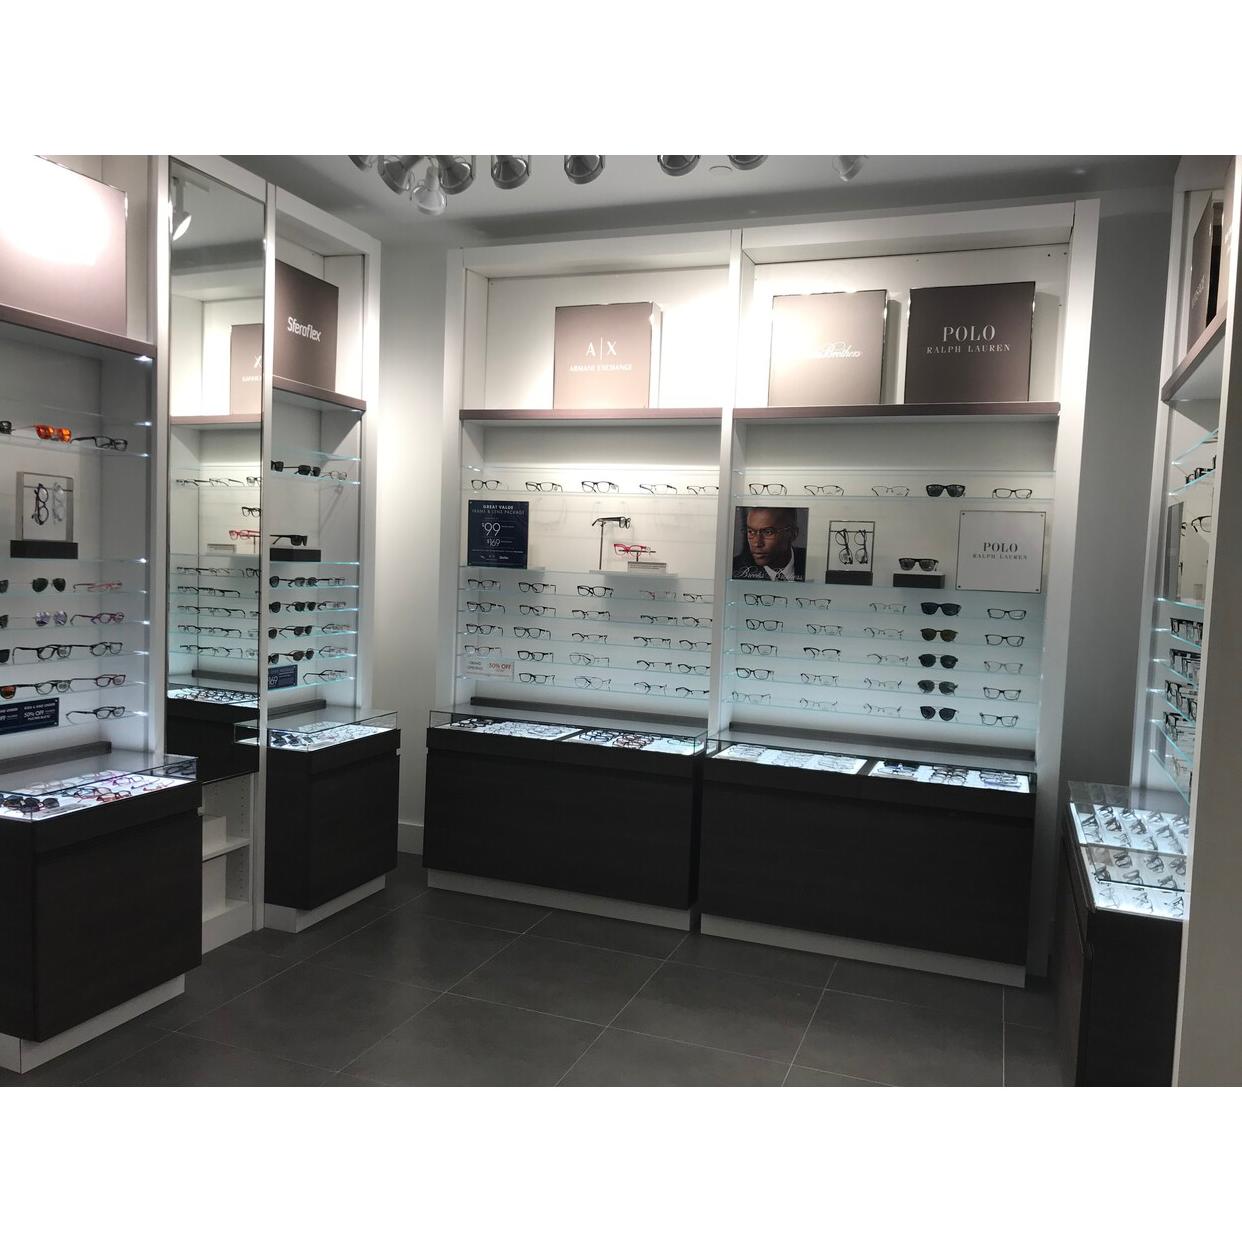 LensCrafters at Macy's Miami (305)937-7629